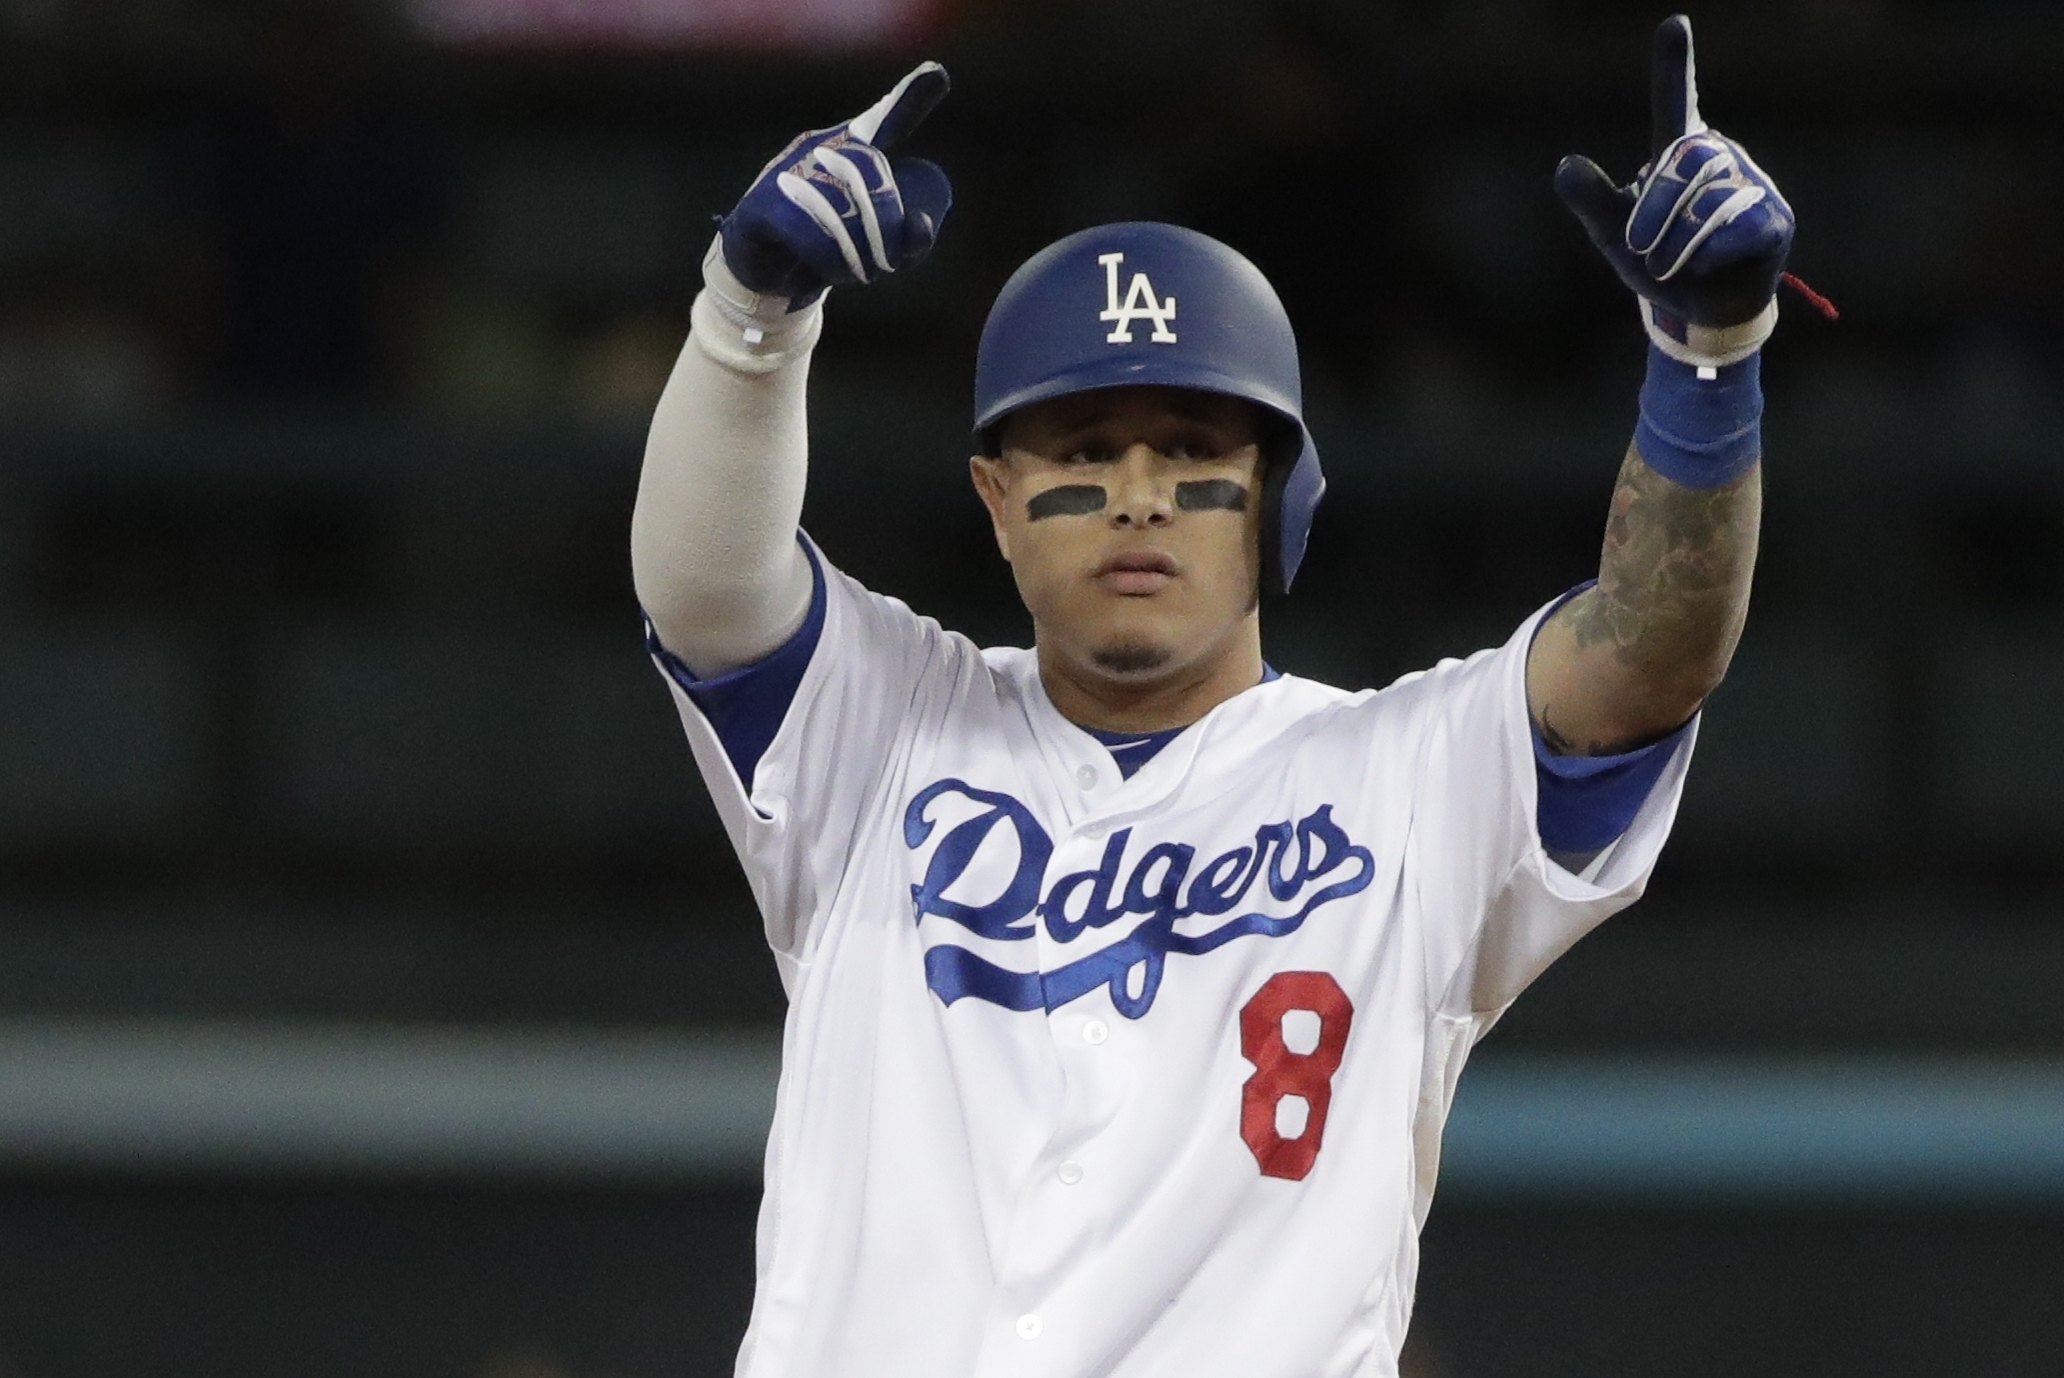 Padres' Manny Machado to opt out of $300M contract after MLB season 